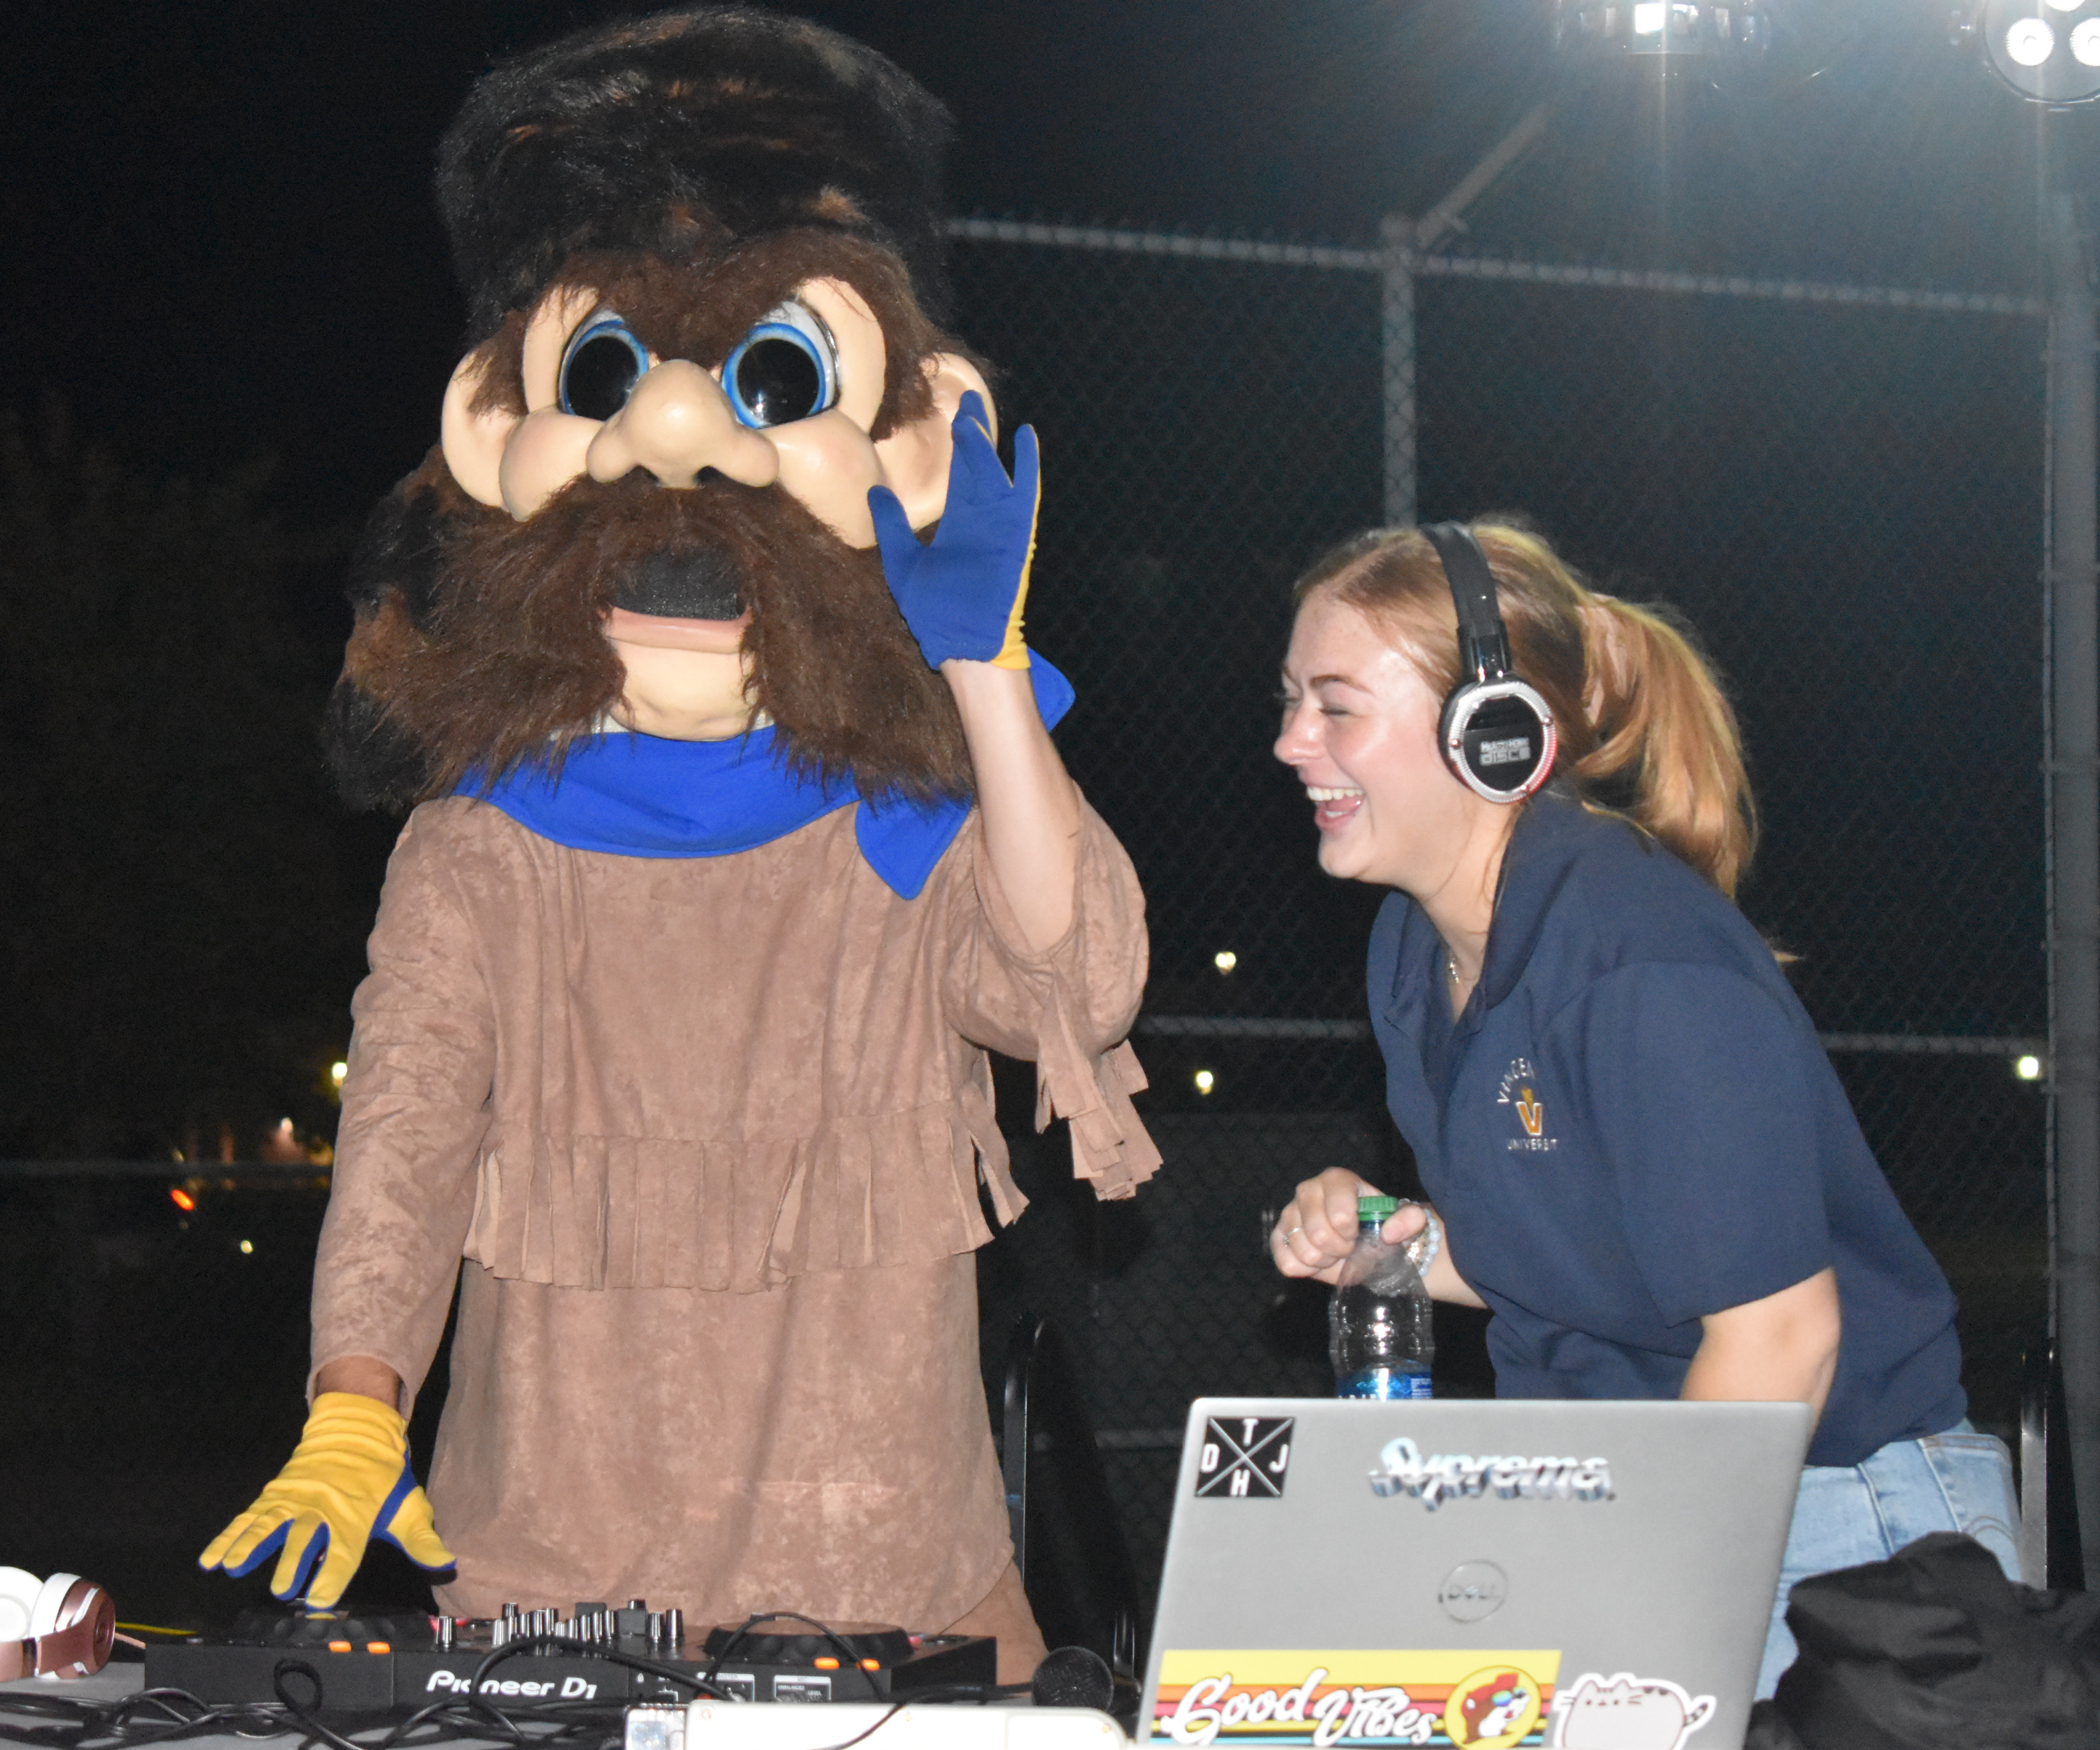 Shelby Liegl and VU mascot Trailblazer Willie DJ at the Silent Headphone Disco during Welcome Week in the fall